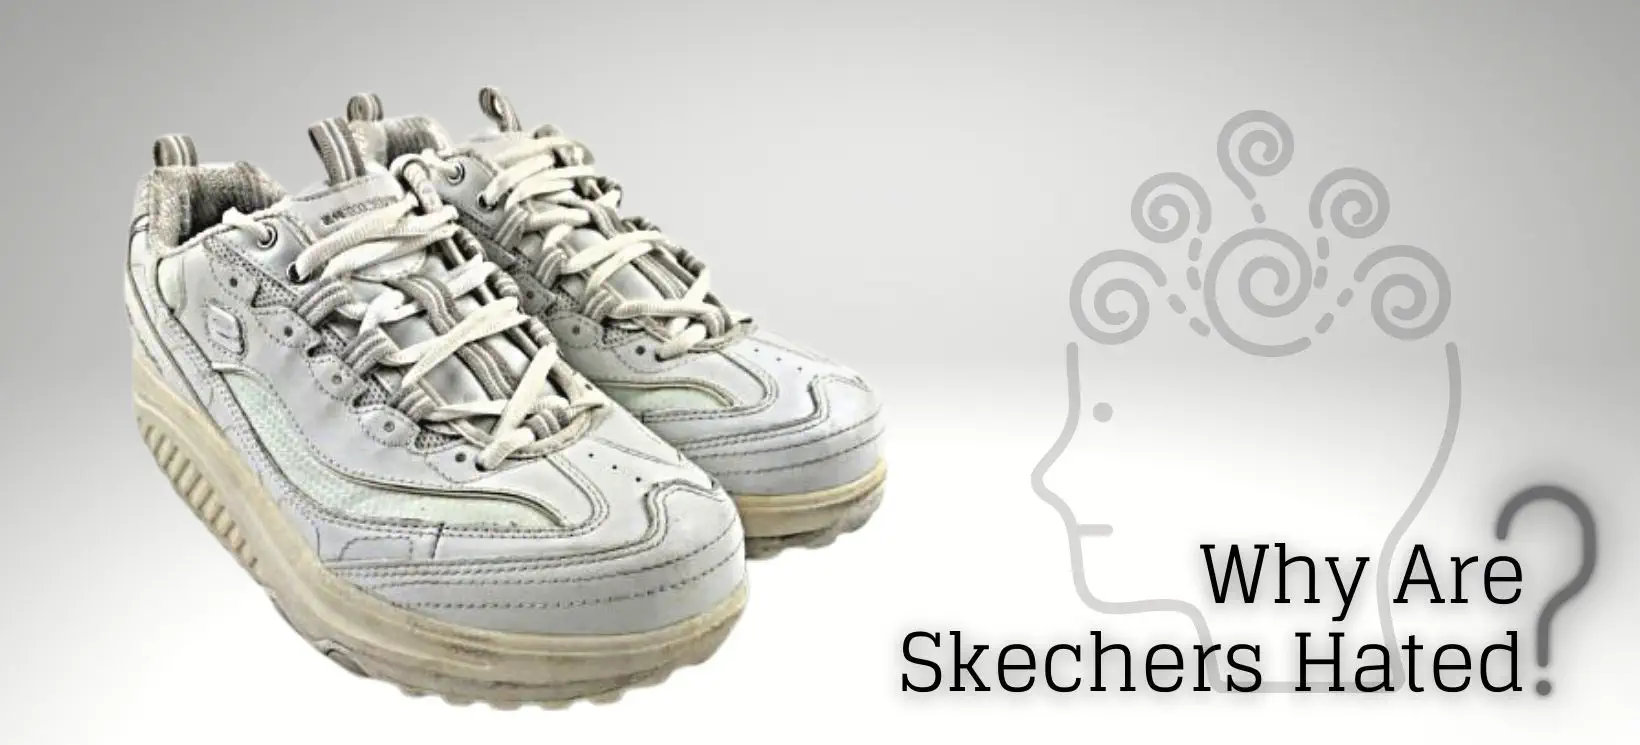 Why Are Skechers Hated?